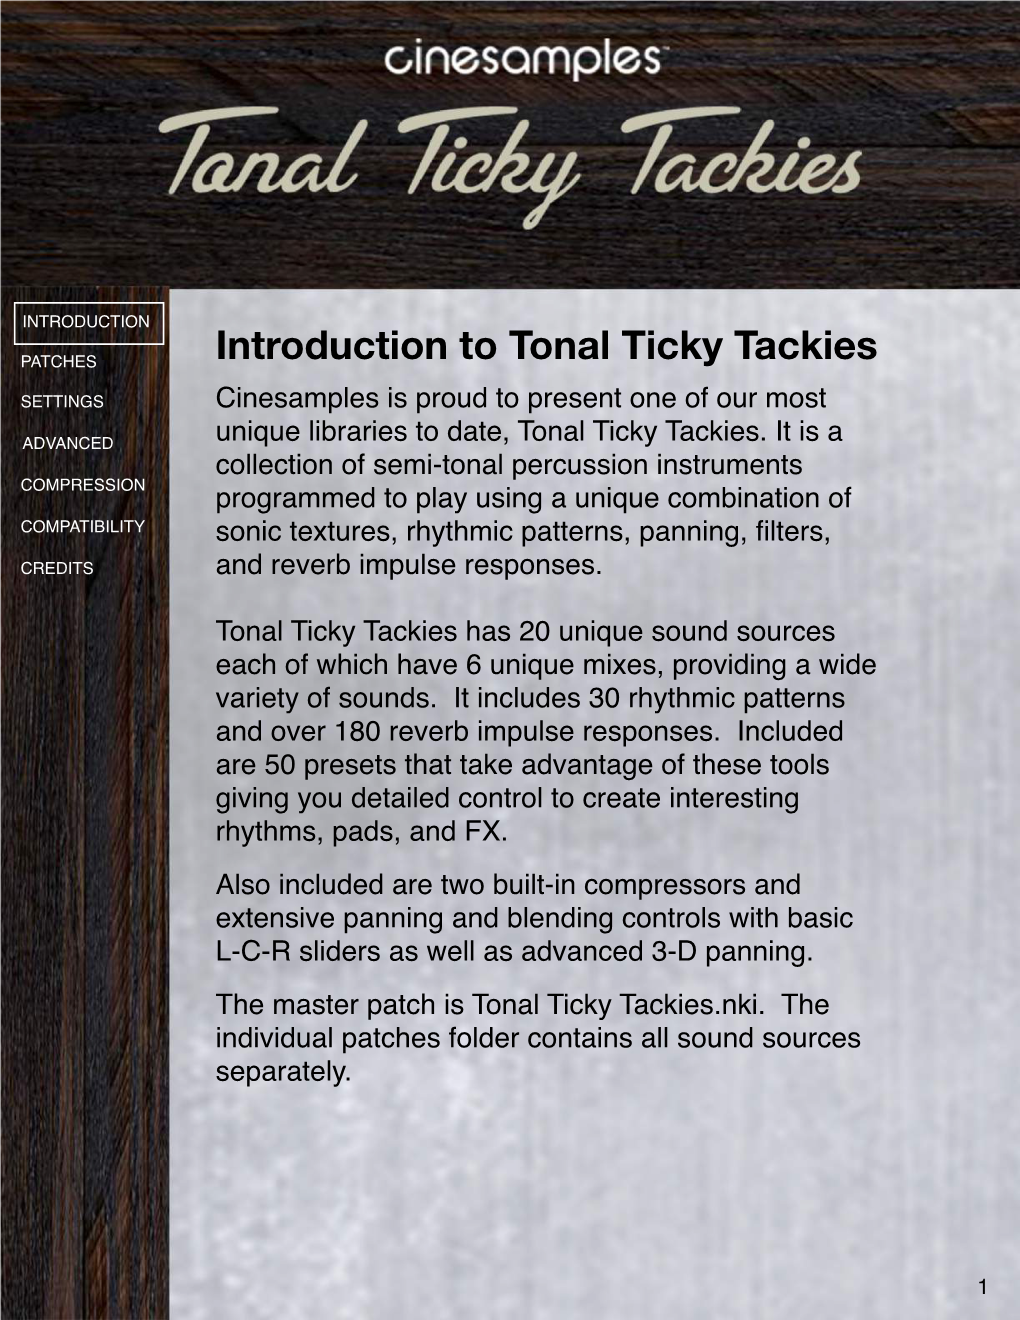 Introduction to Tonal Ticky Tackies